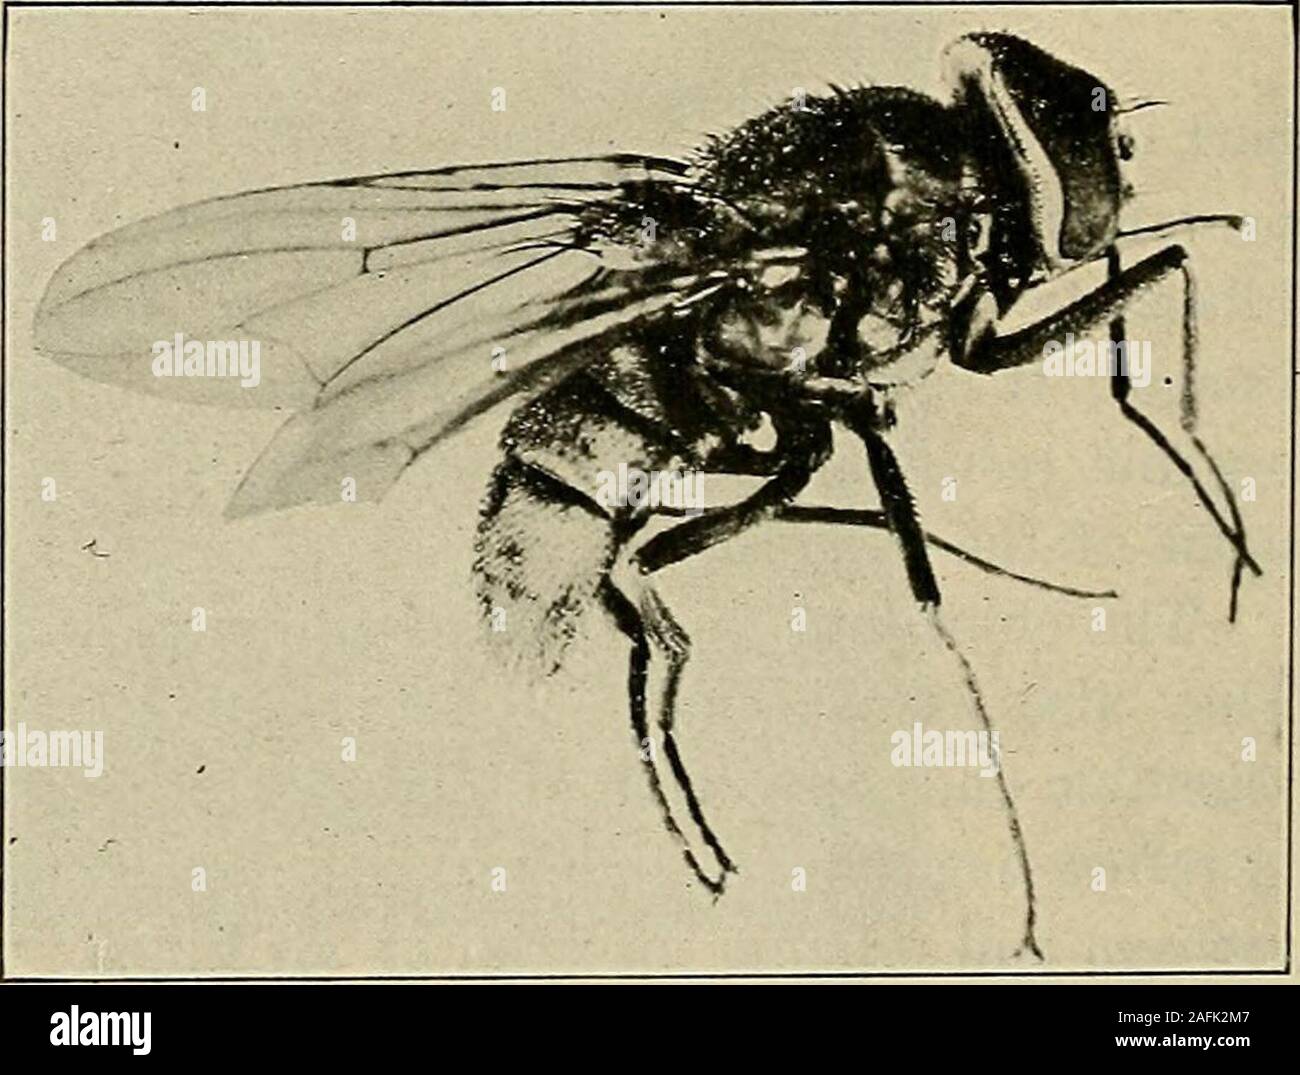 . Preventive medicine and hygiene. FiG. 31.—PuPARiuM OF House Fly. brewers refuse (spent hops), etc.house fly, but have a sharp, needle-like proboscis,sively on mammalian blood and are a great annoyance to horses andcattle in late summer and autumn. They bite persons less frequently,but are of importance onaccount of their possiblerelation to poliomyelitis,anthrax, etc. The sta-ble fly can best be con-trolled by eliminating itsbreeding places. Flies as MechanicalCarriers of Infection.—Leidy in 1864: attributedthe sjDread of gangrenein hospitals during theCivil War to the agencyof the house fly Stock Photo